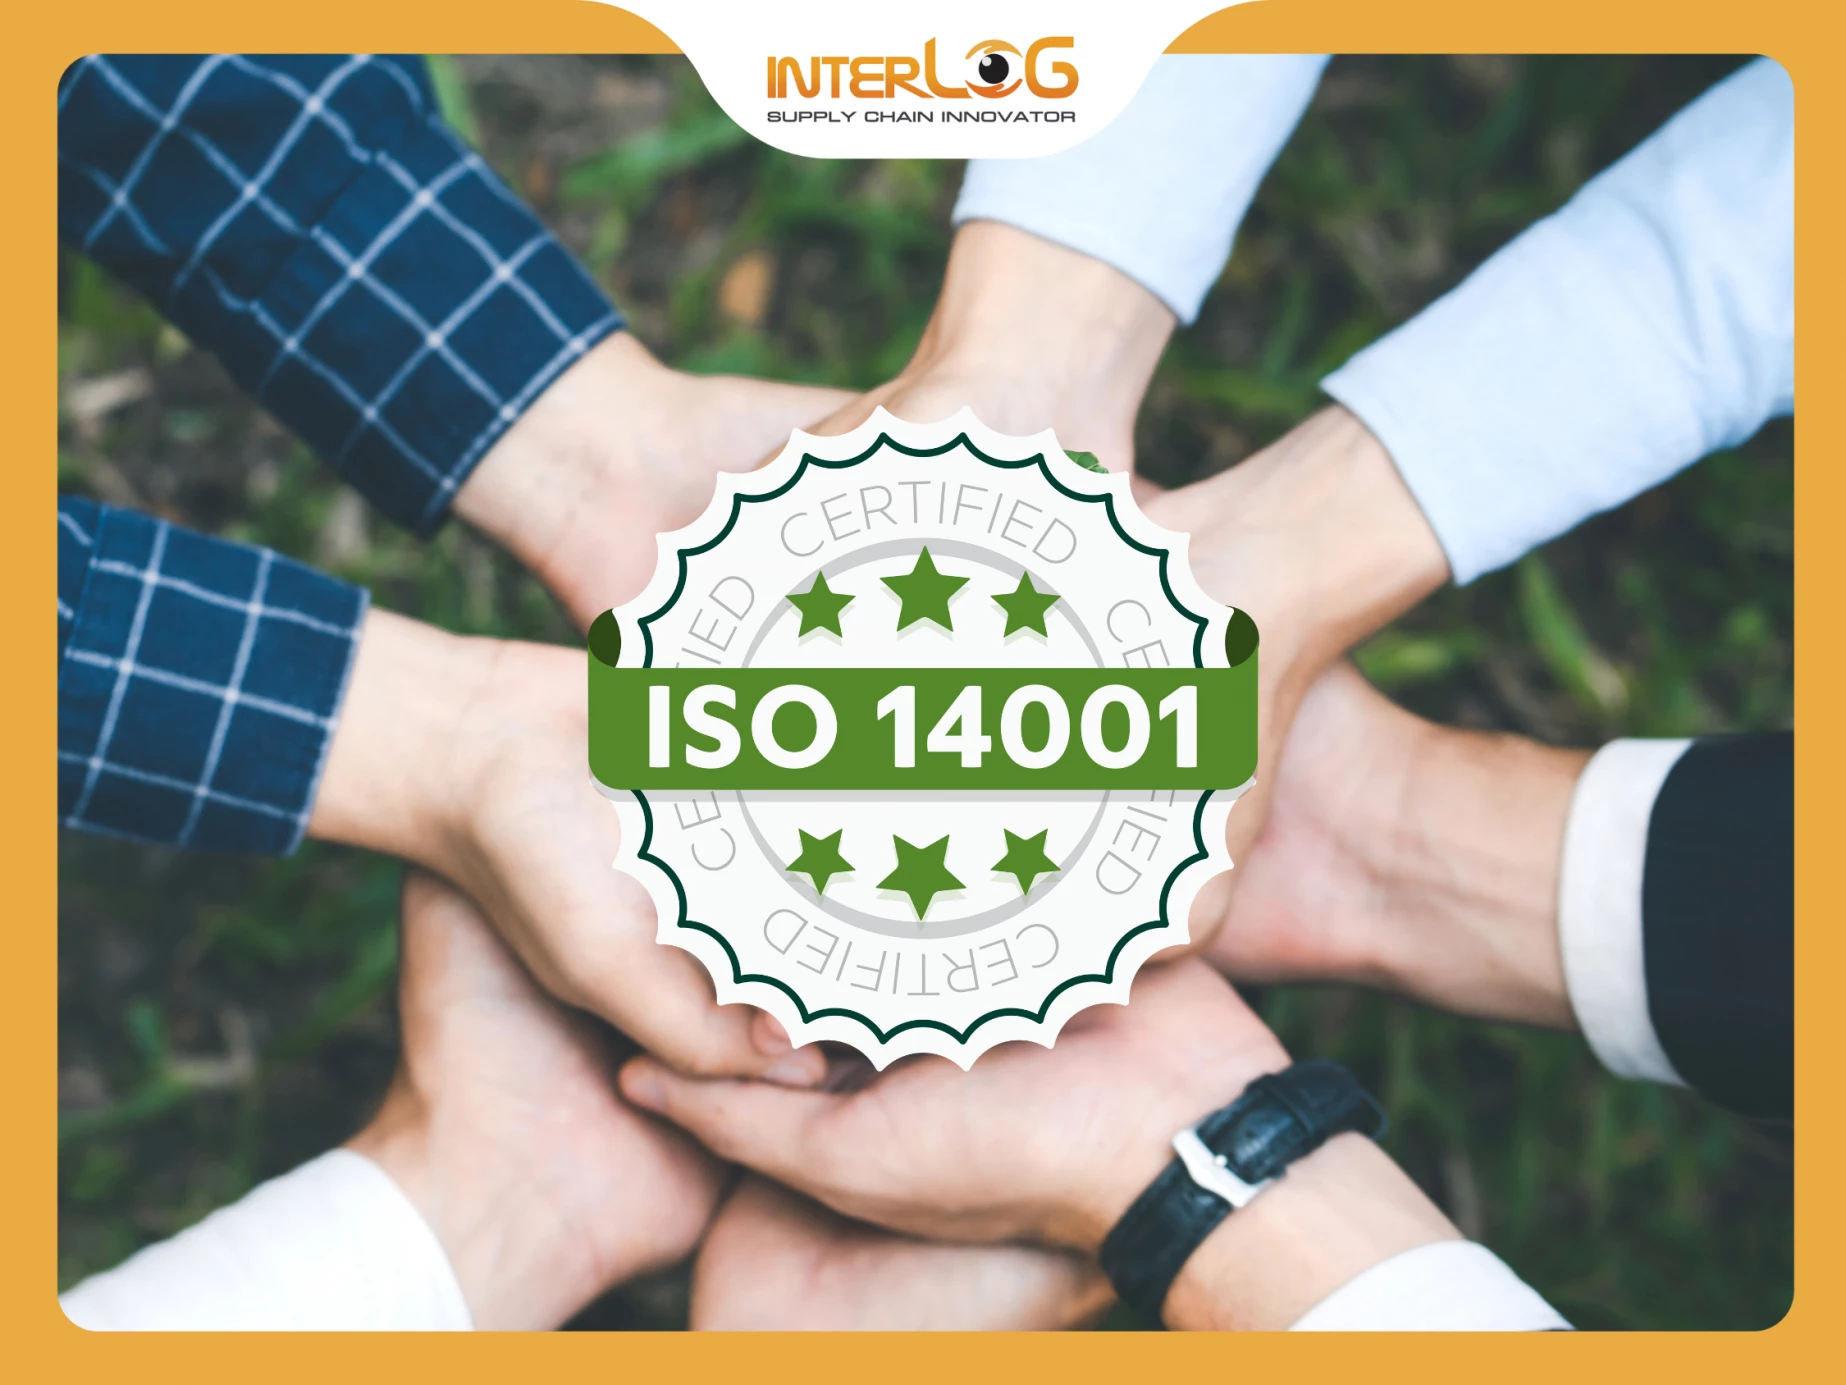 [Green Transition] - InterLOG achieves ISO 14001: 2015 certification for Environmental Management